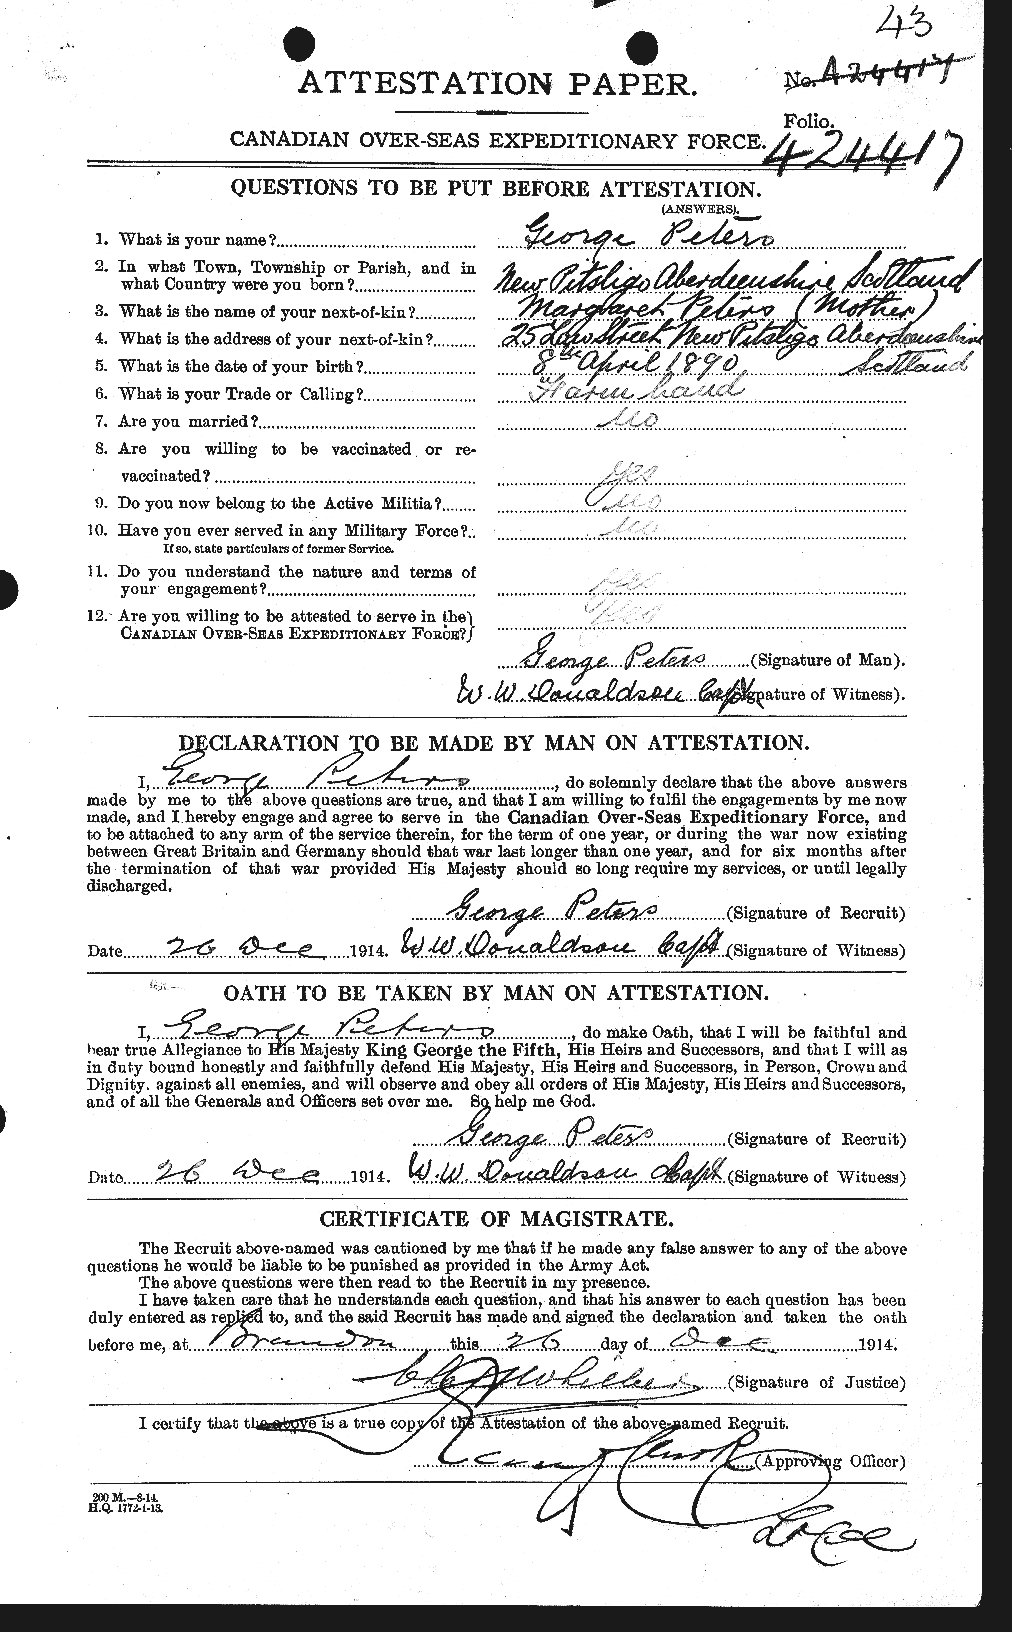 Personnel Records of the First World War - CEF 575449a